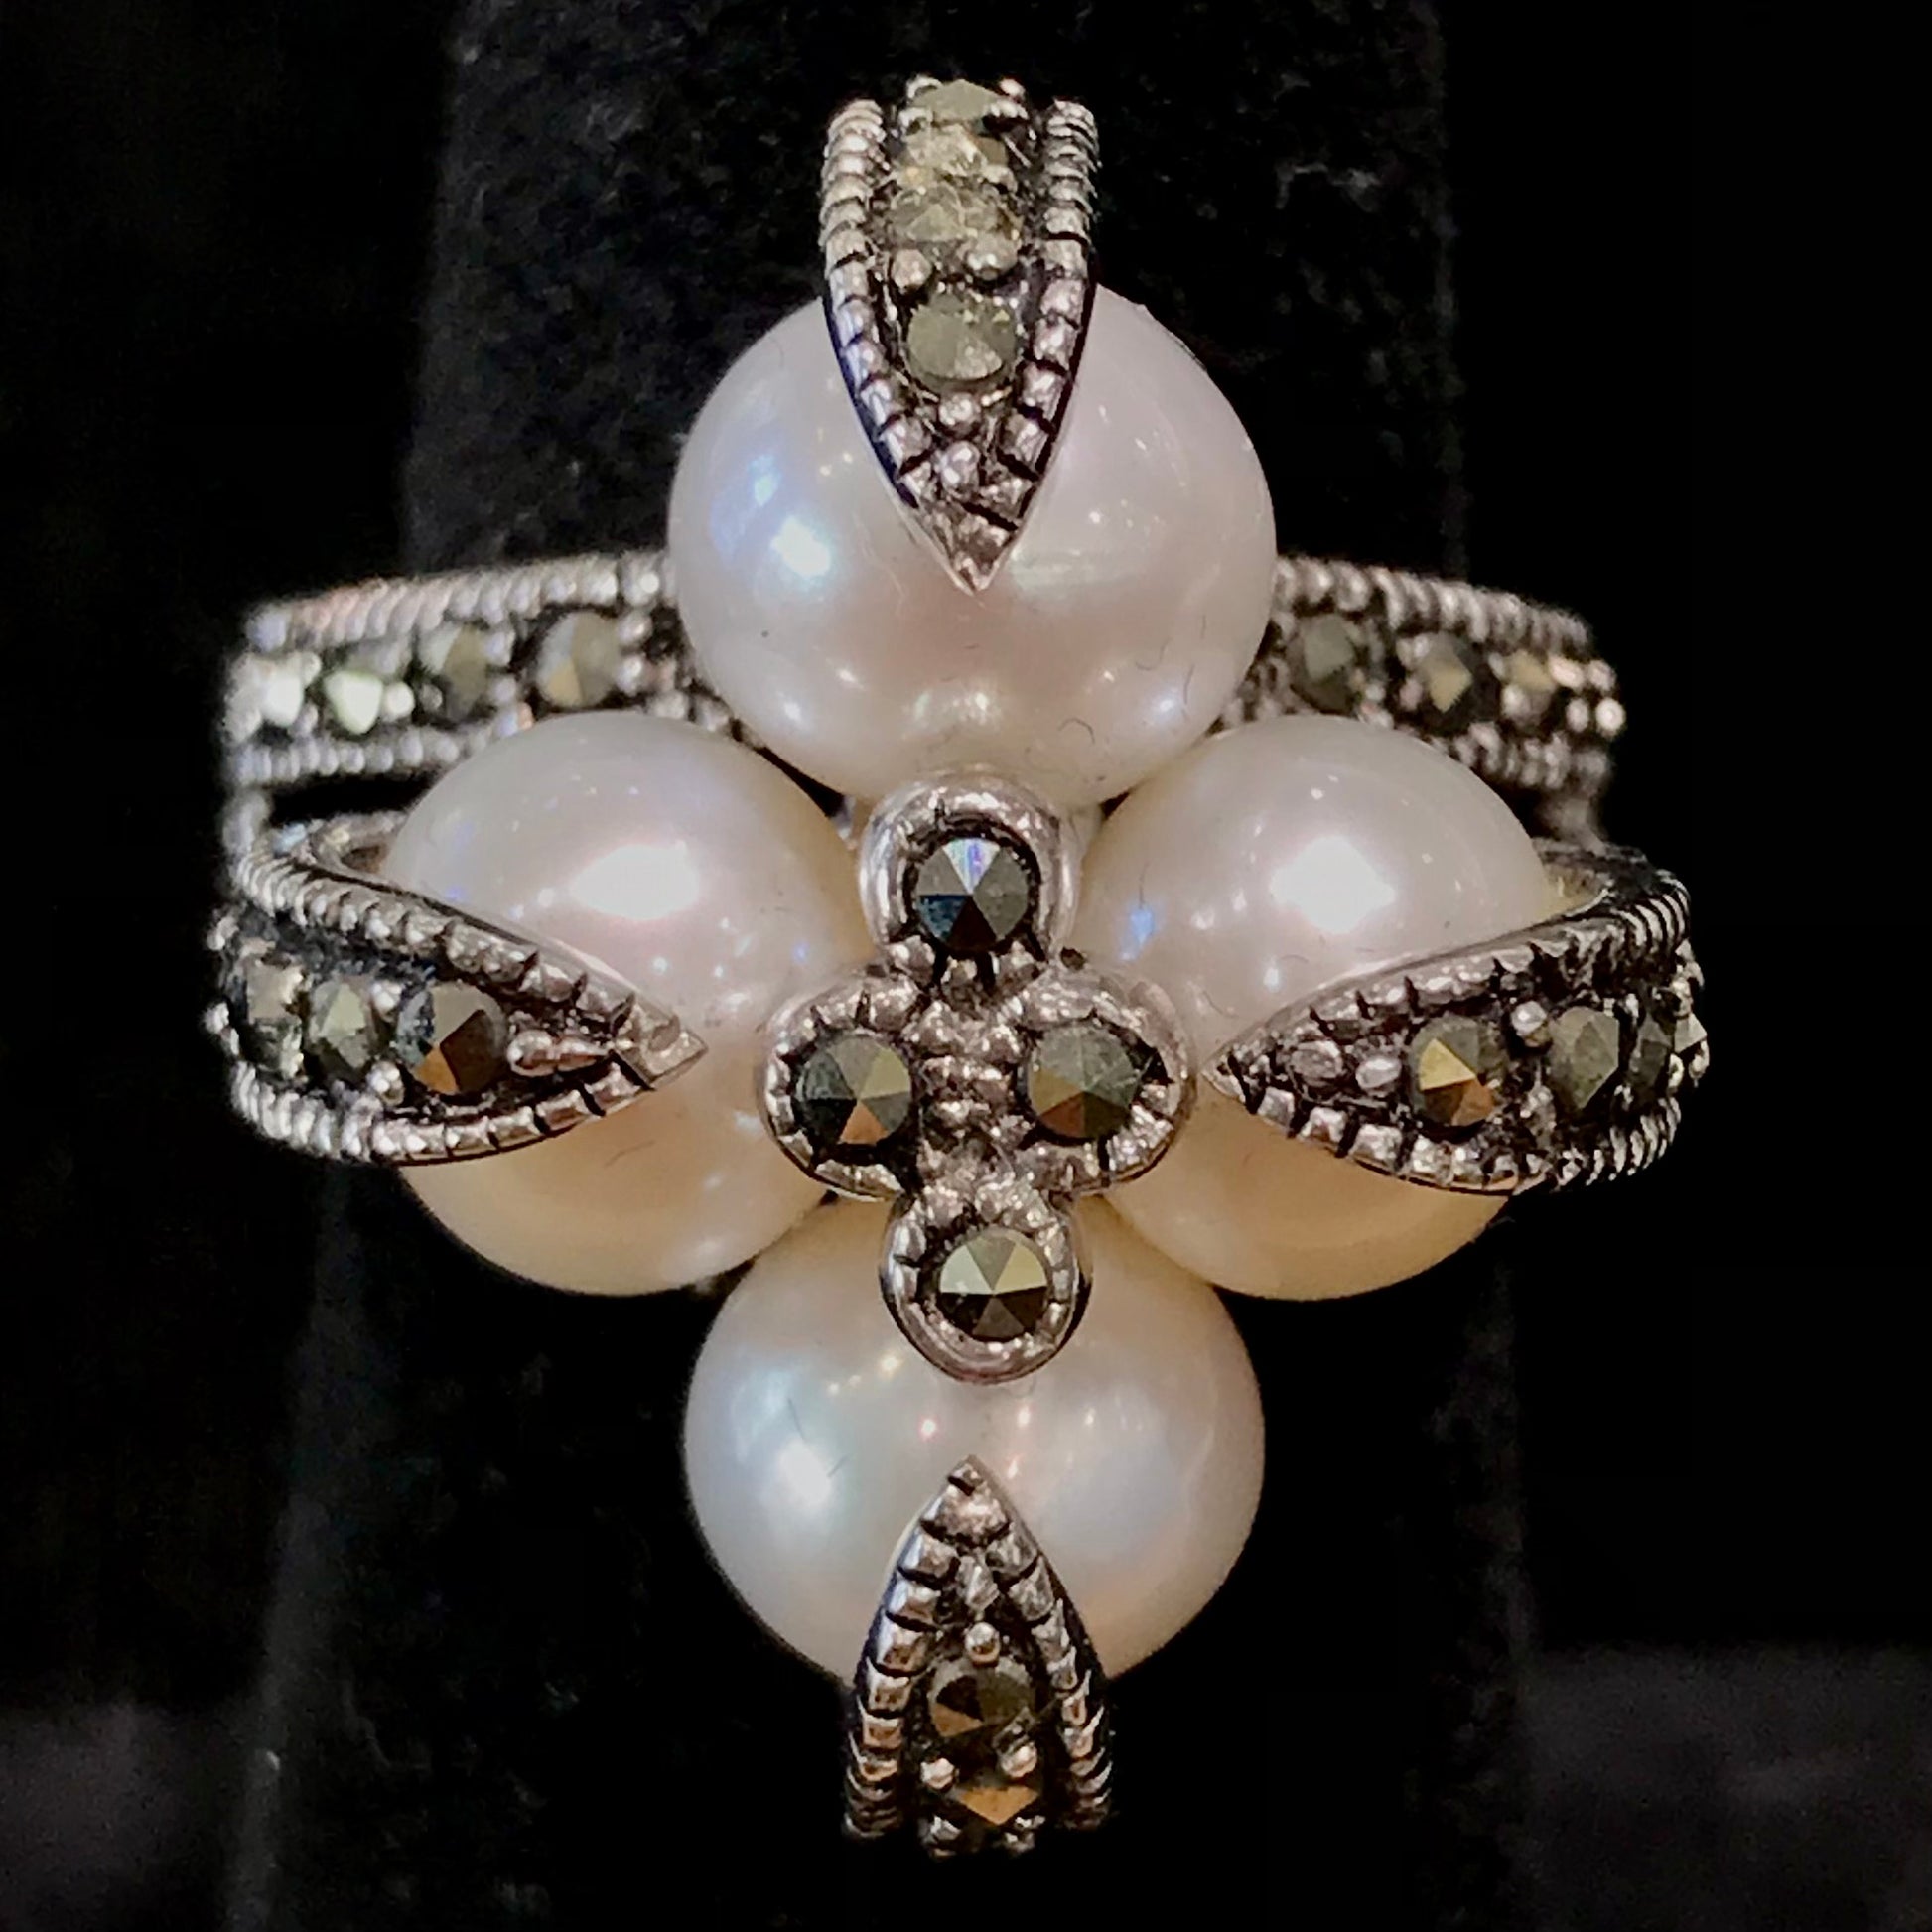 Pearl and marcasite ring set in sterling silver.